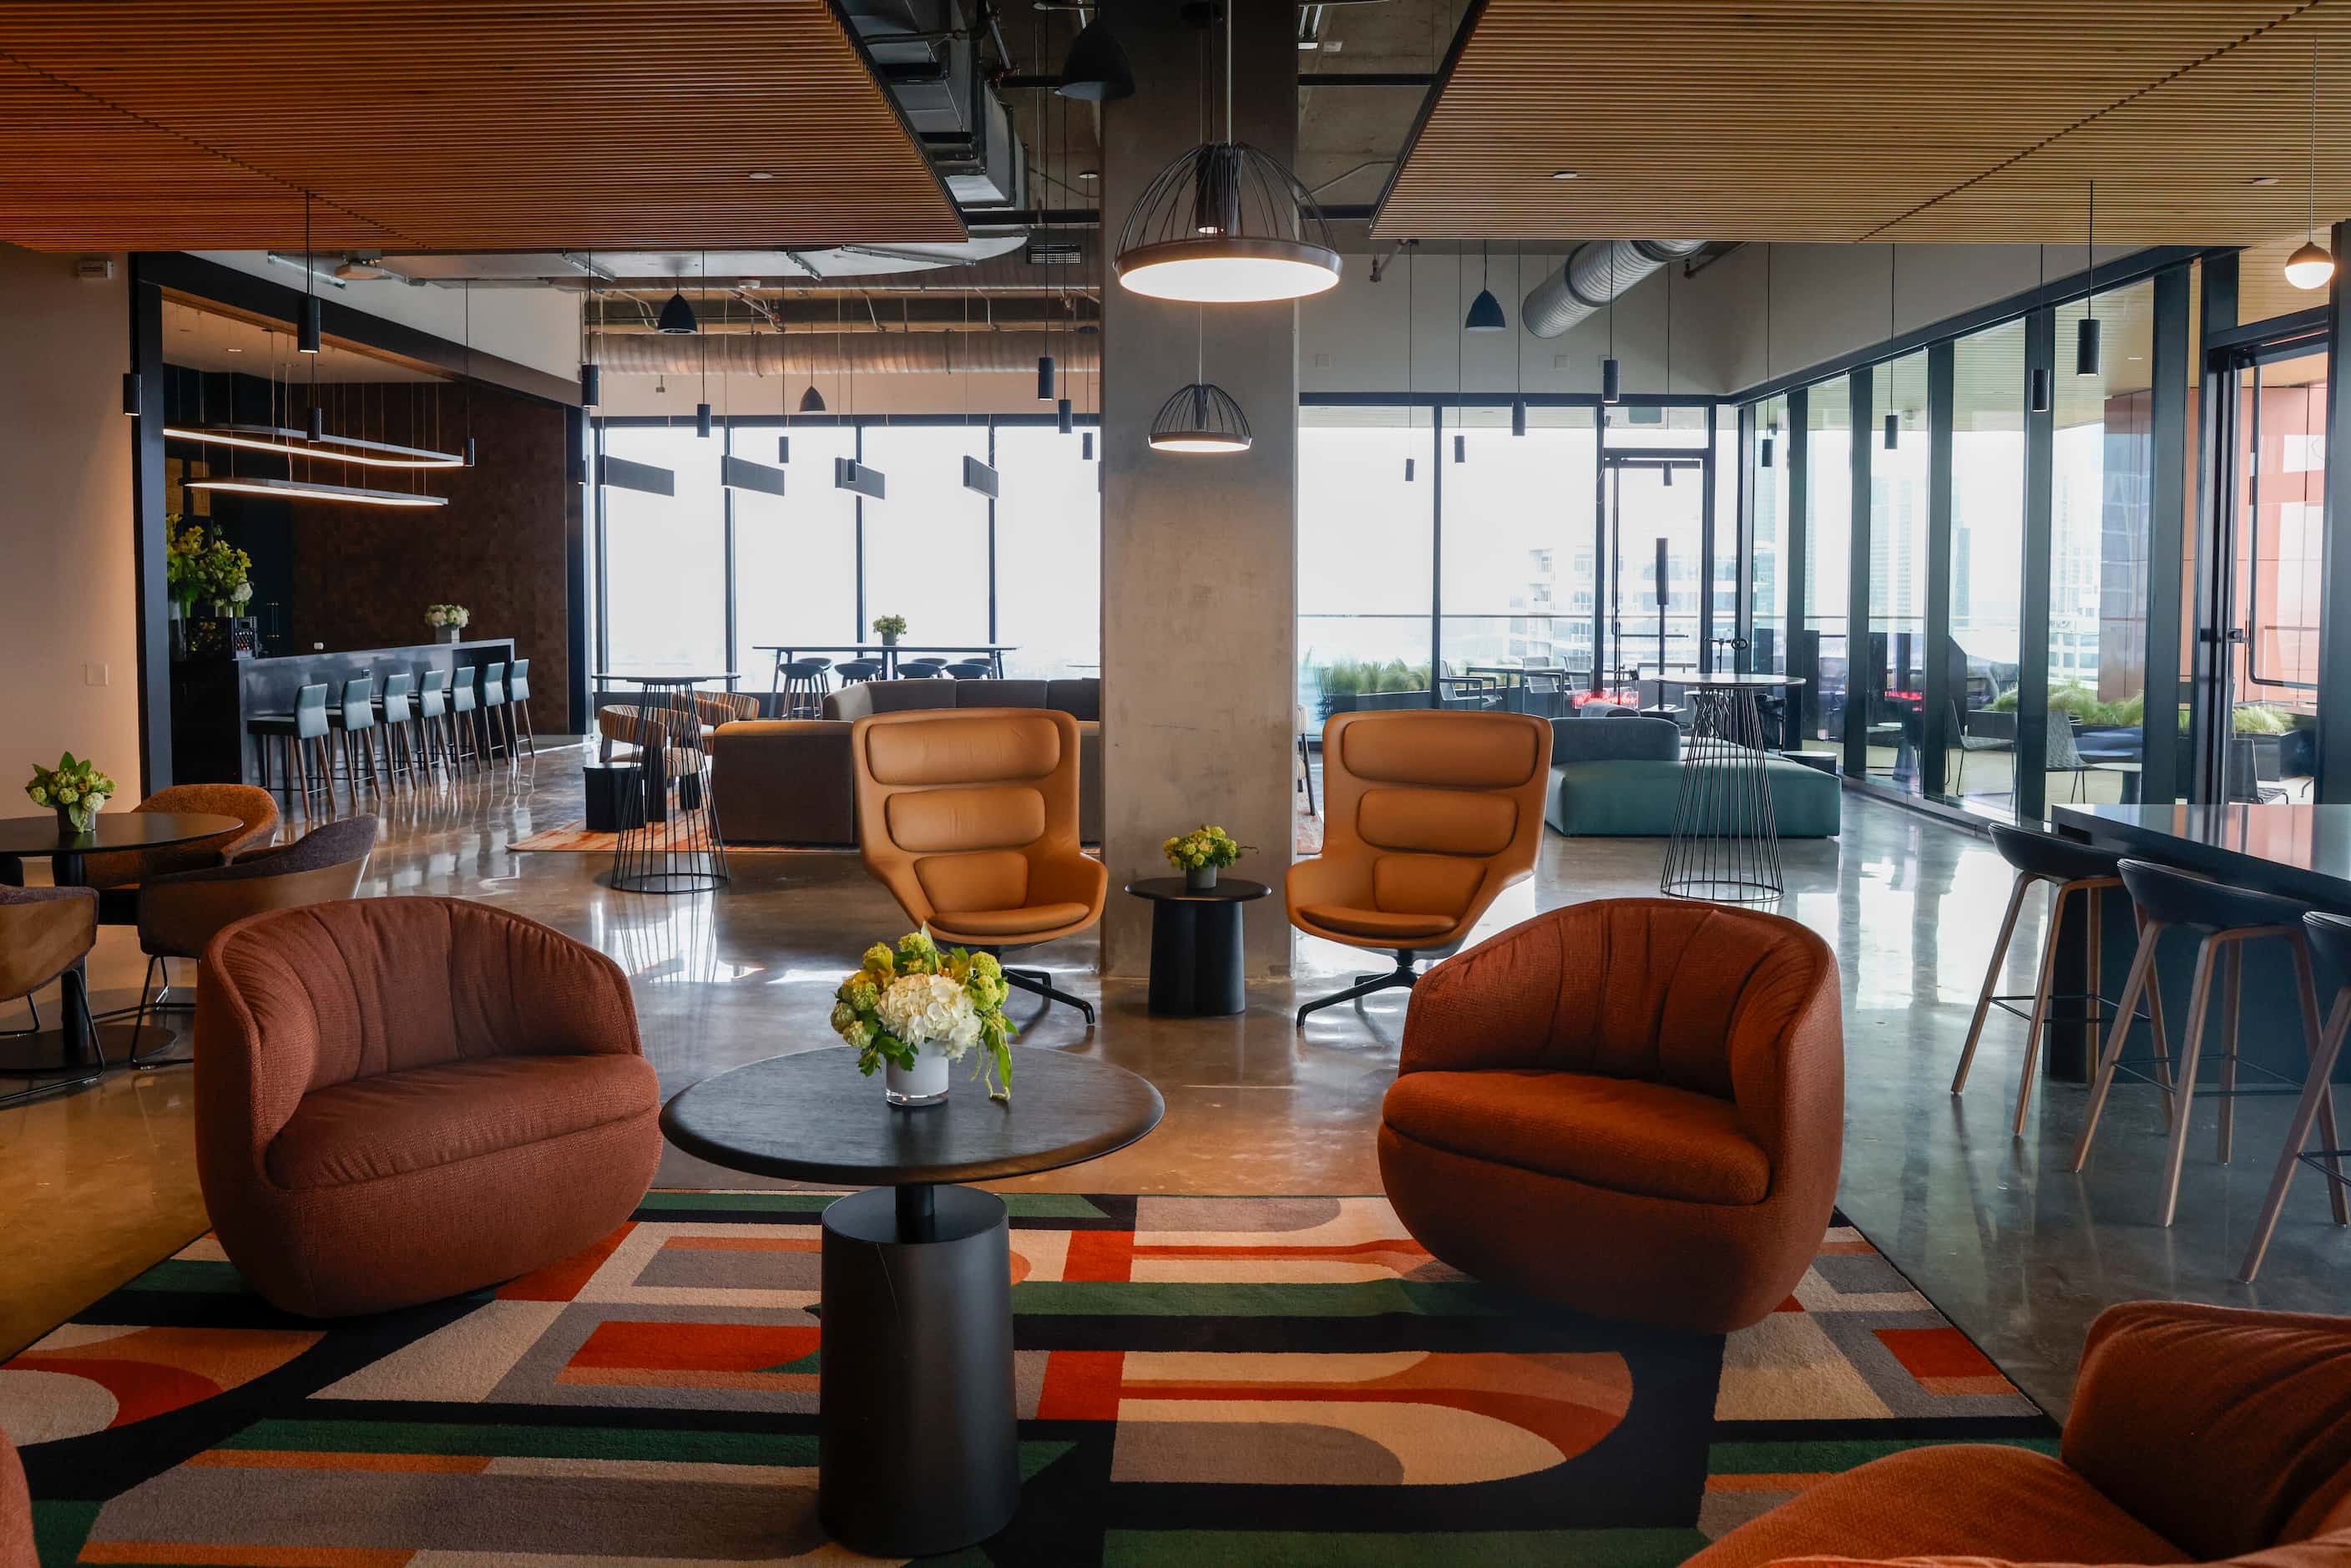 The penthouse level at The Quad office building includes "The Quad Club," an amenity level...